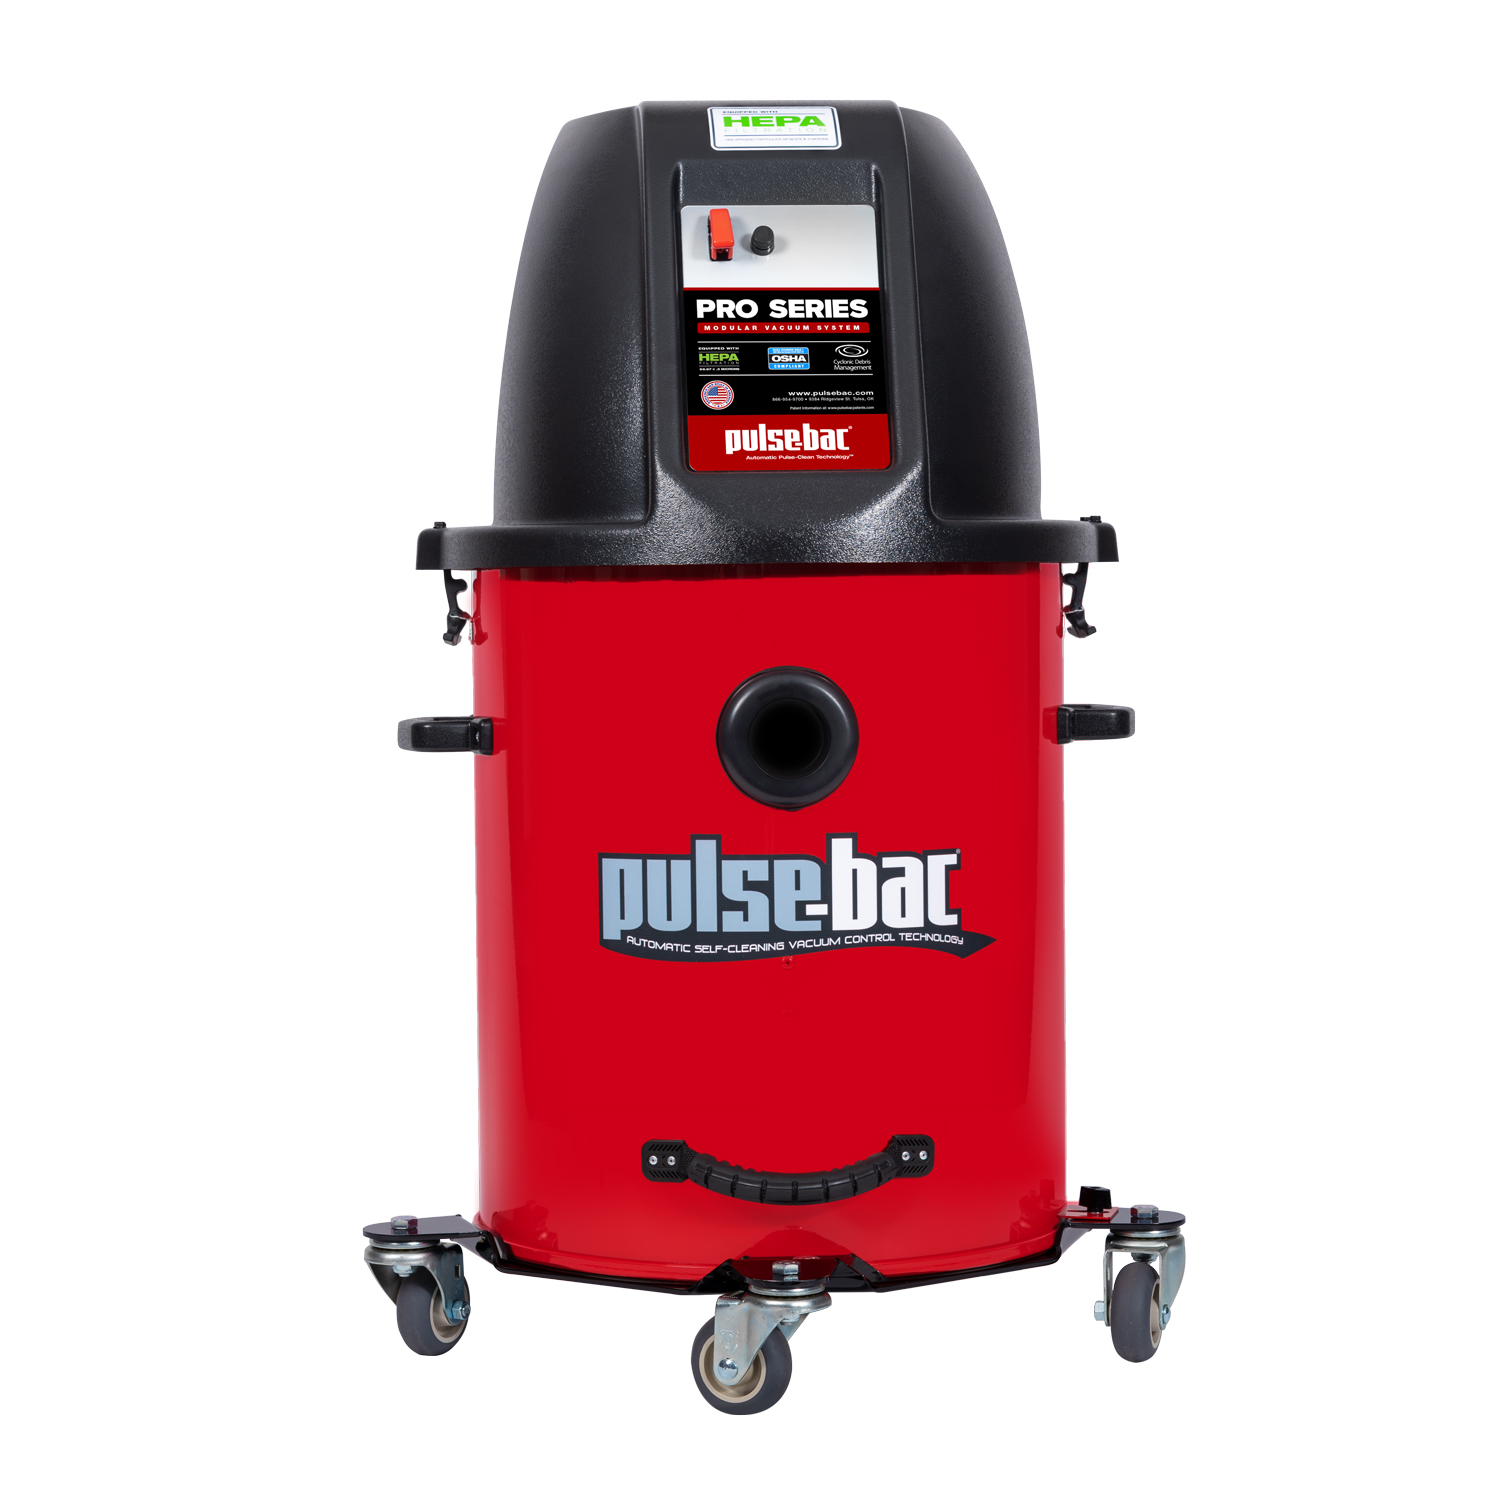 Dust Commander offers the Pulse-Bac Pro 311 Commercial Vacuum cleaner.